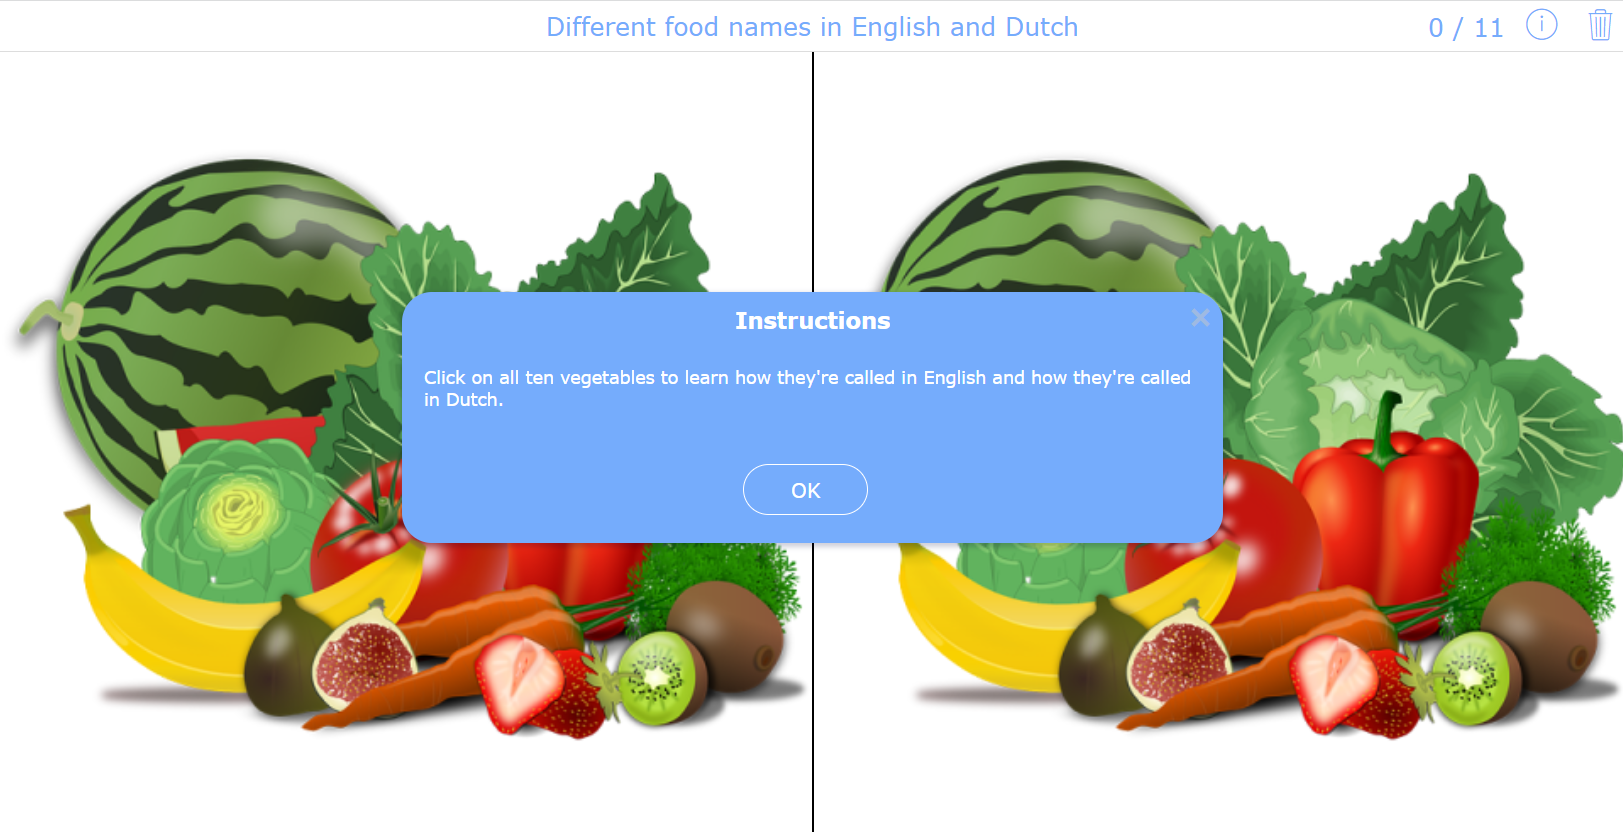 Different food names in English and Dutch